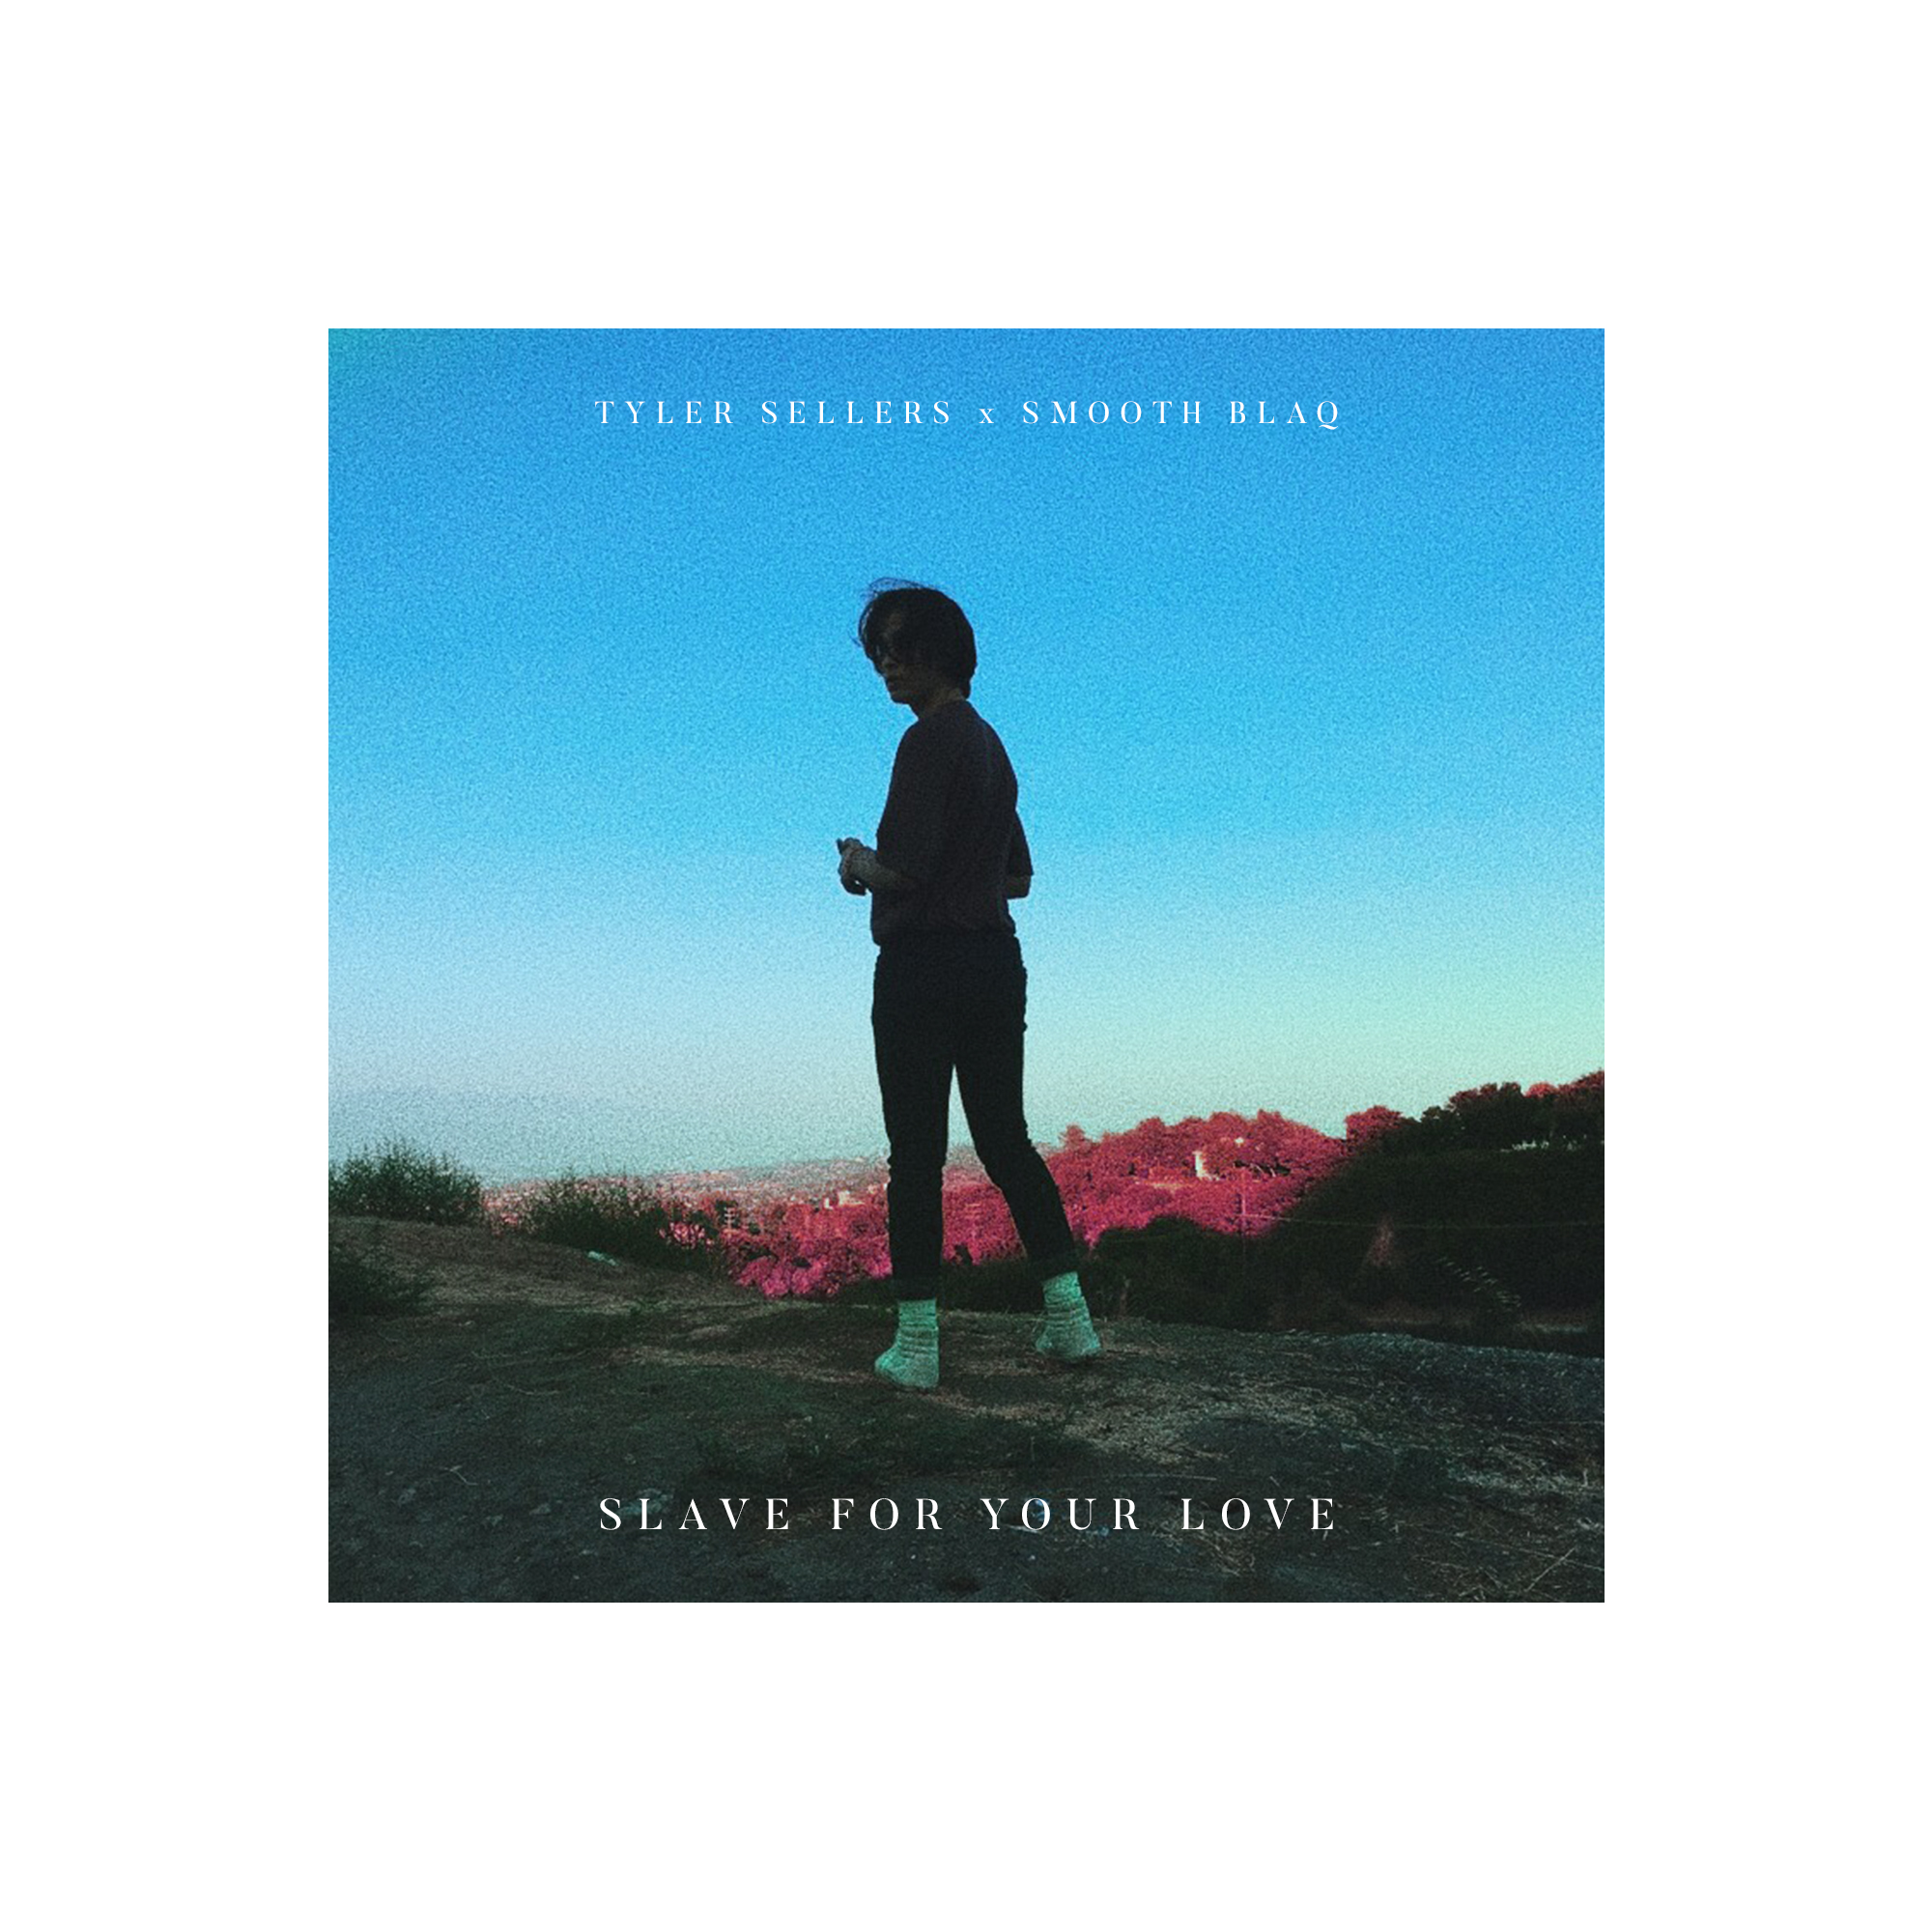 Tyler Sellers x Smooth BLAQ – “Slave For Your Love”